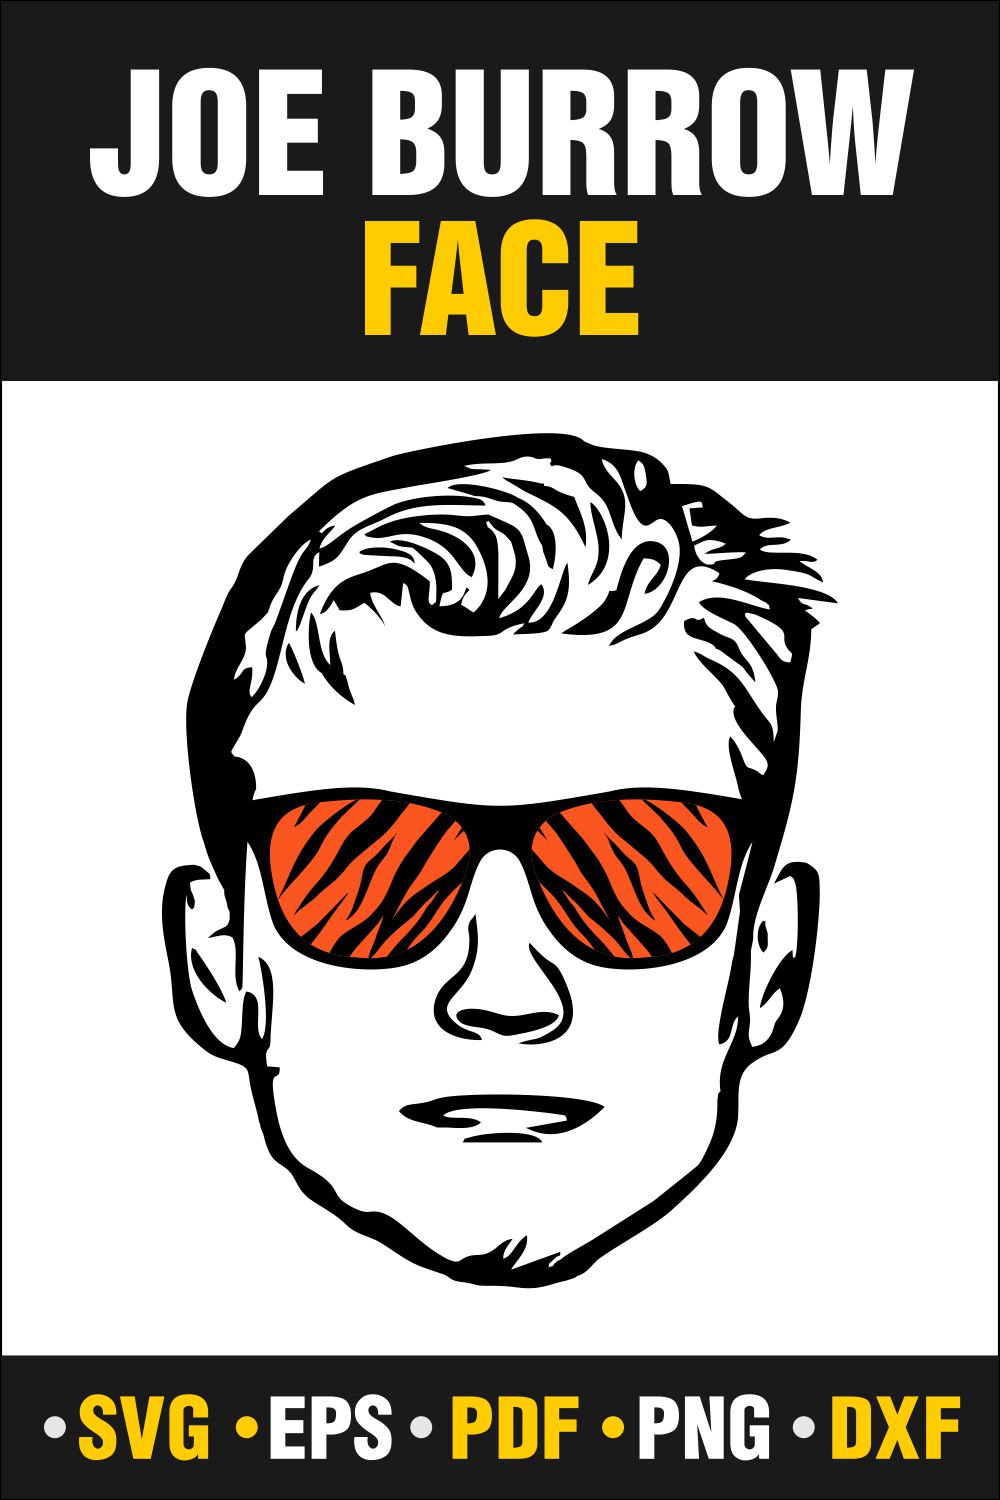 Joe Burrow Face SVG, PDF, PNG, DXF, EPS - Only $4 pinterest preview image.